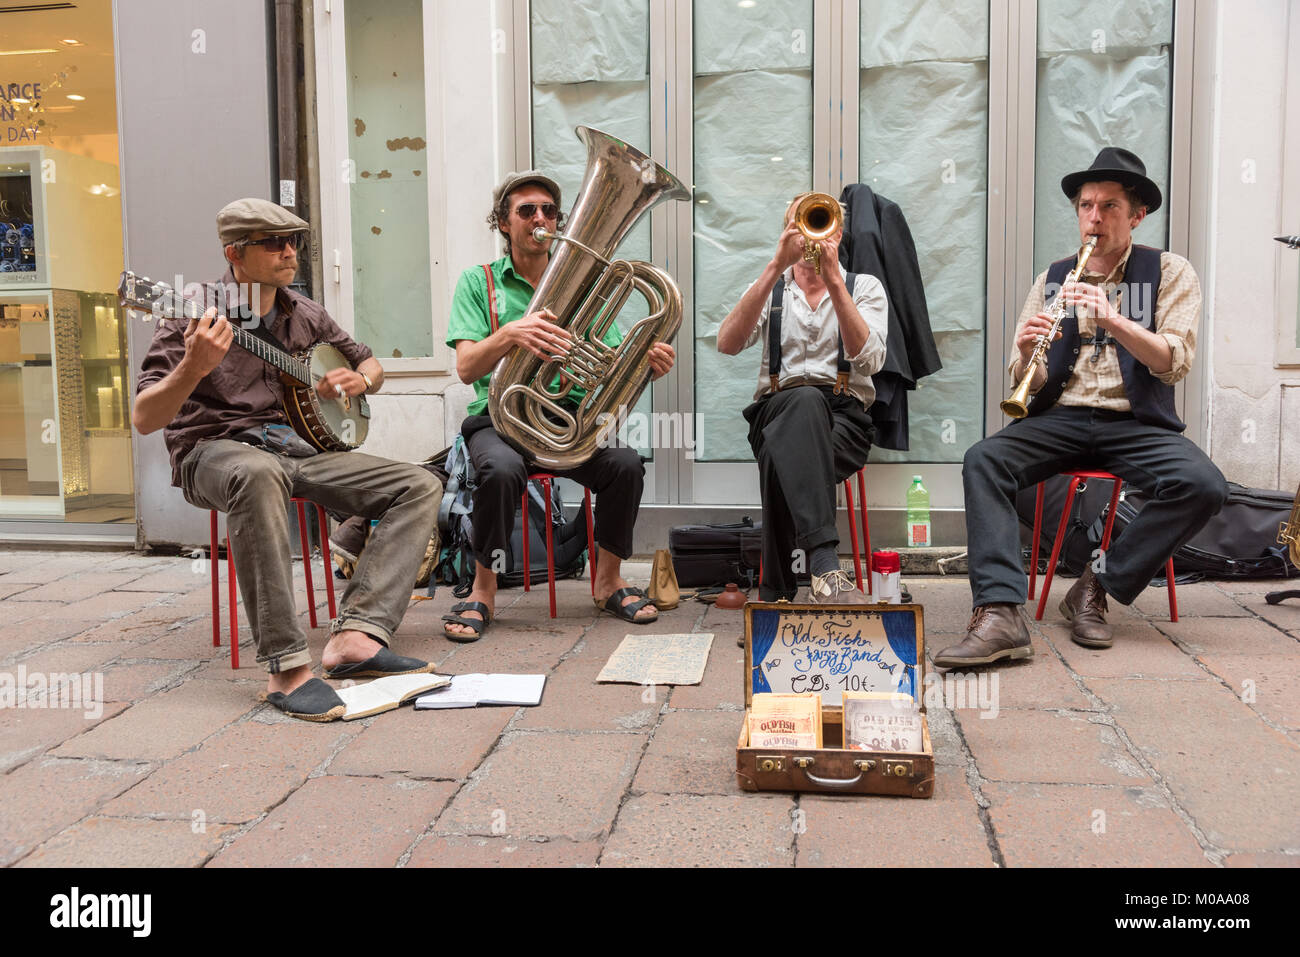 The Old Fish Jazz Band busking in a street in the city of Bologna Italy Stock Photo